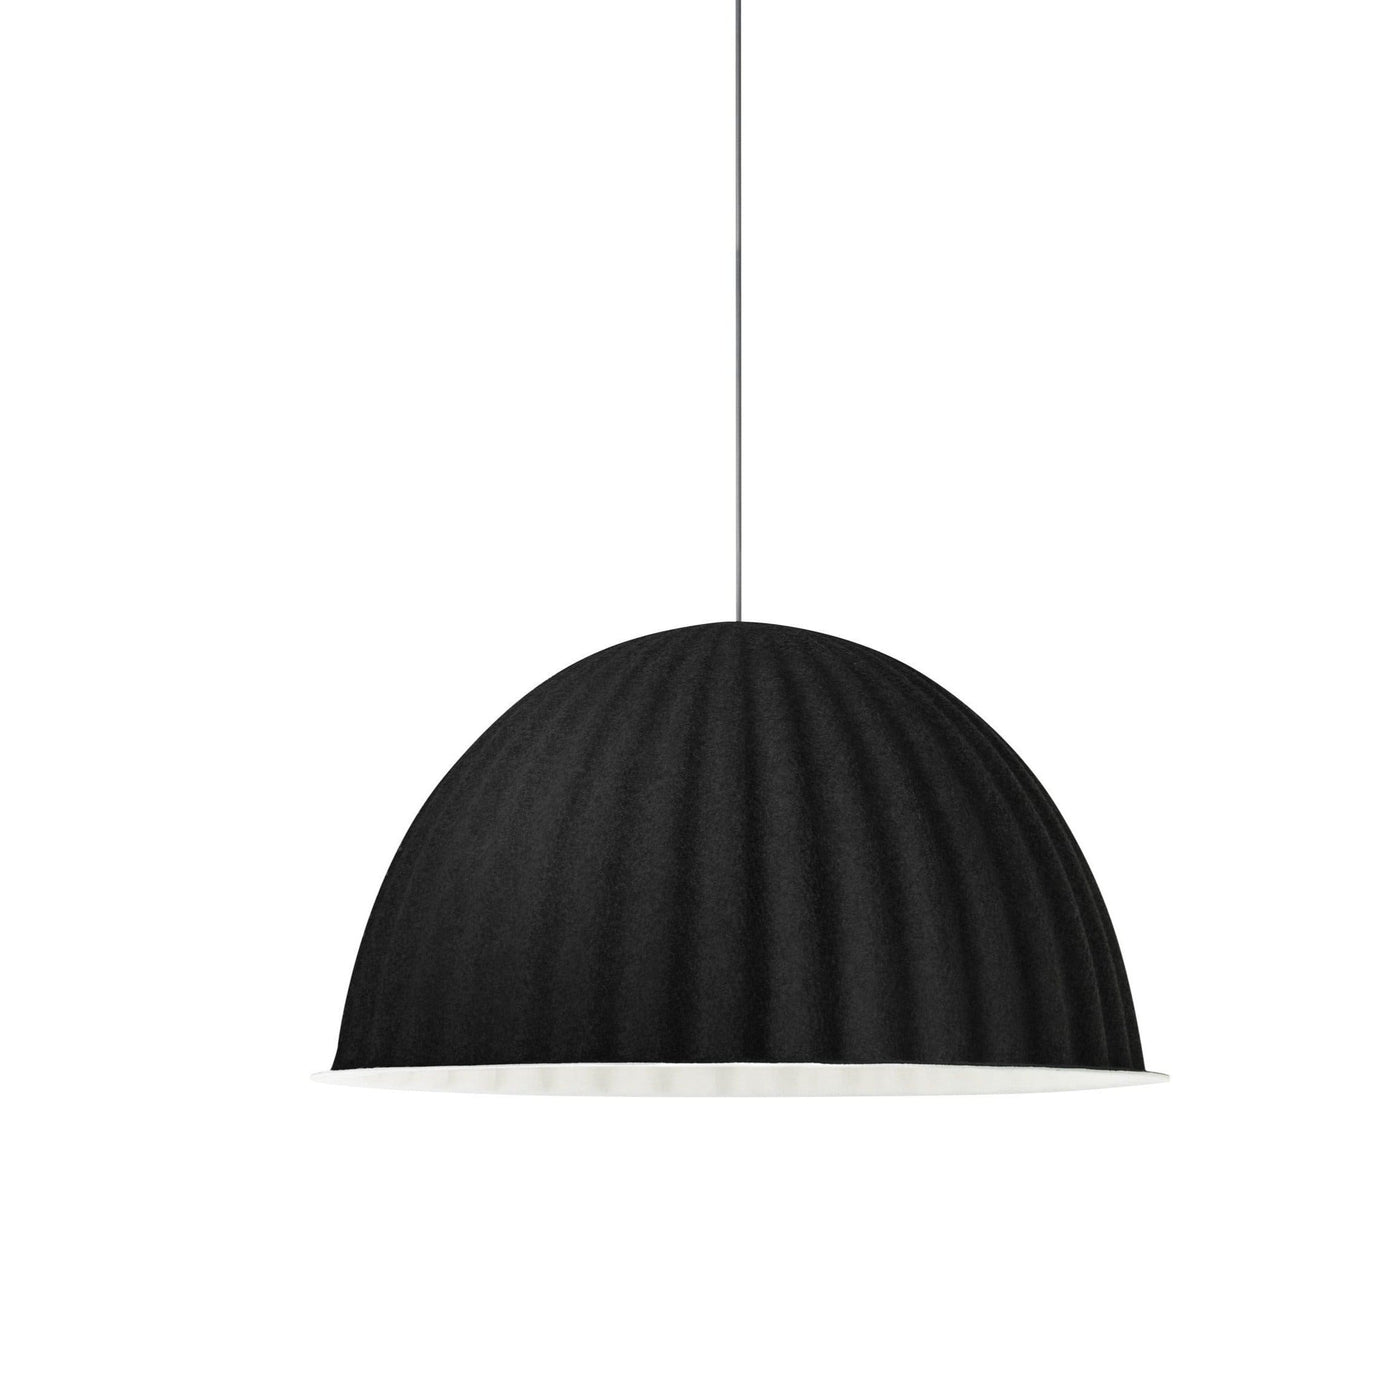 muuto under the bell pendant lamp black large available at someday designs. #colour_black-felt